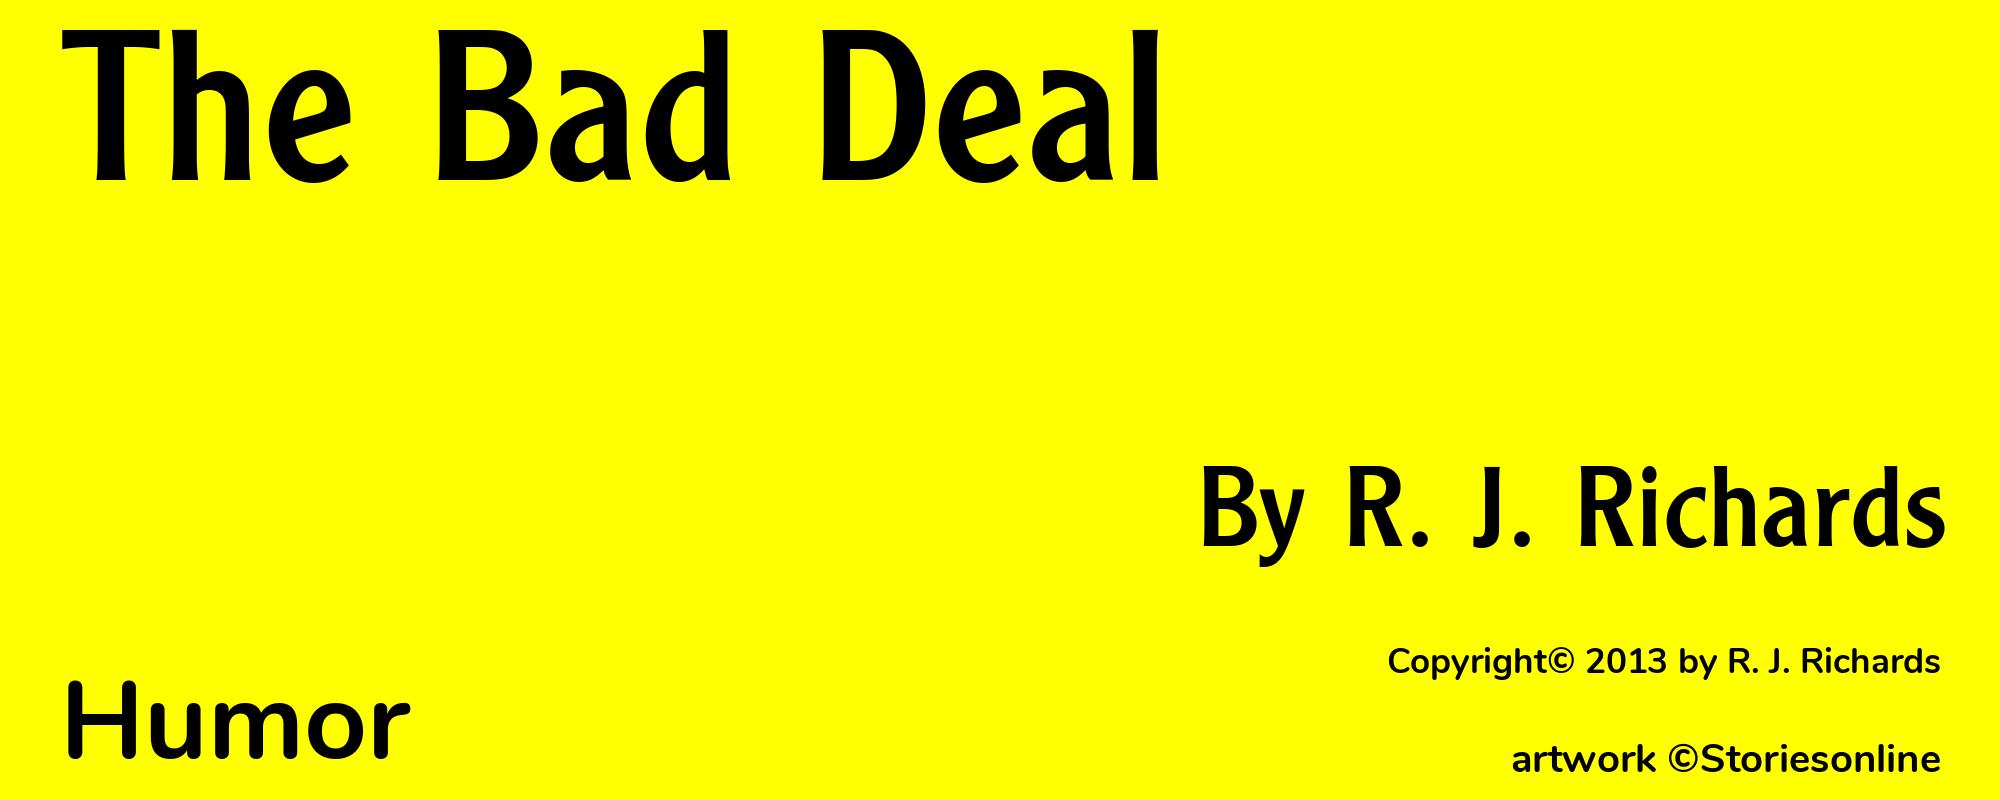 The Bad Deal - Cover